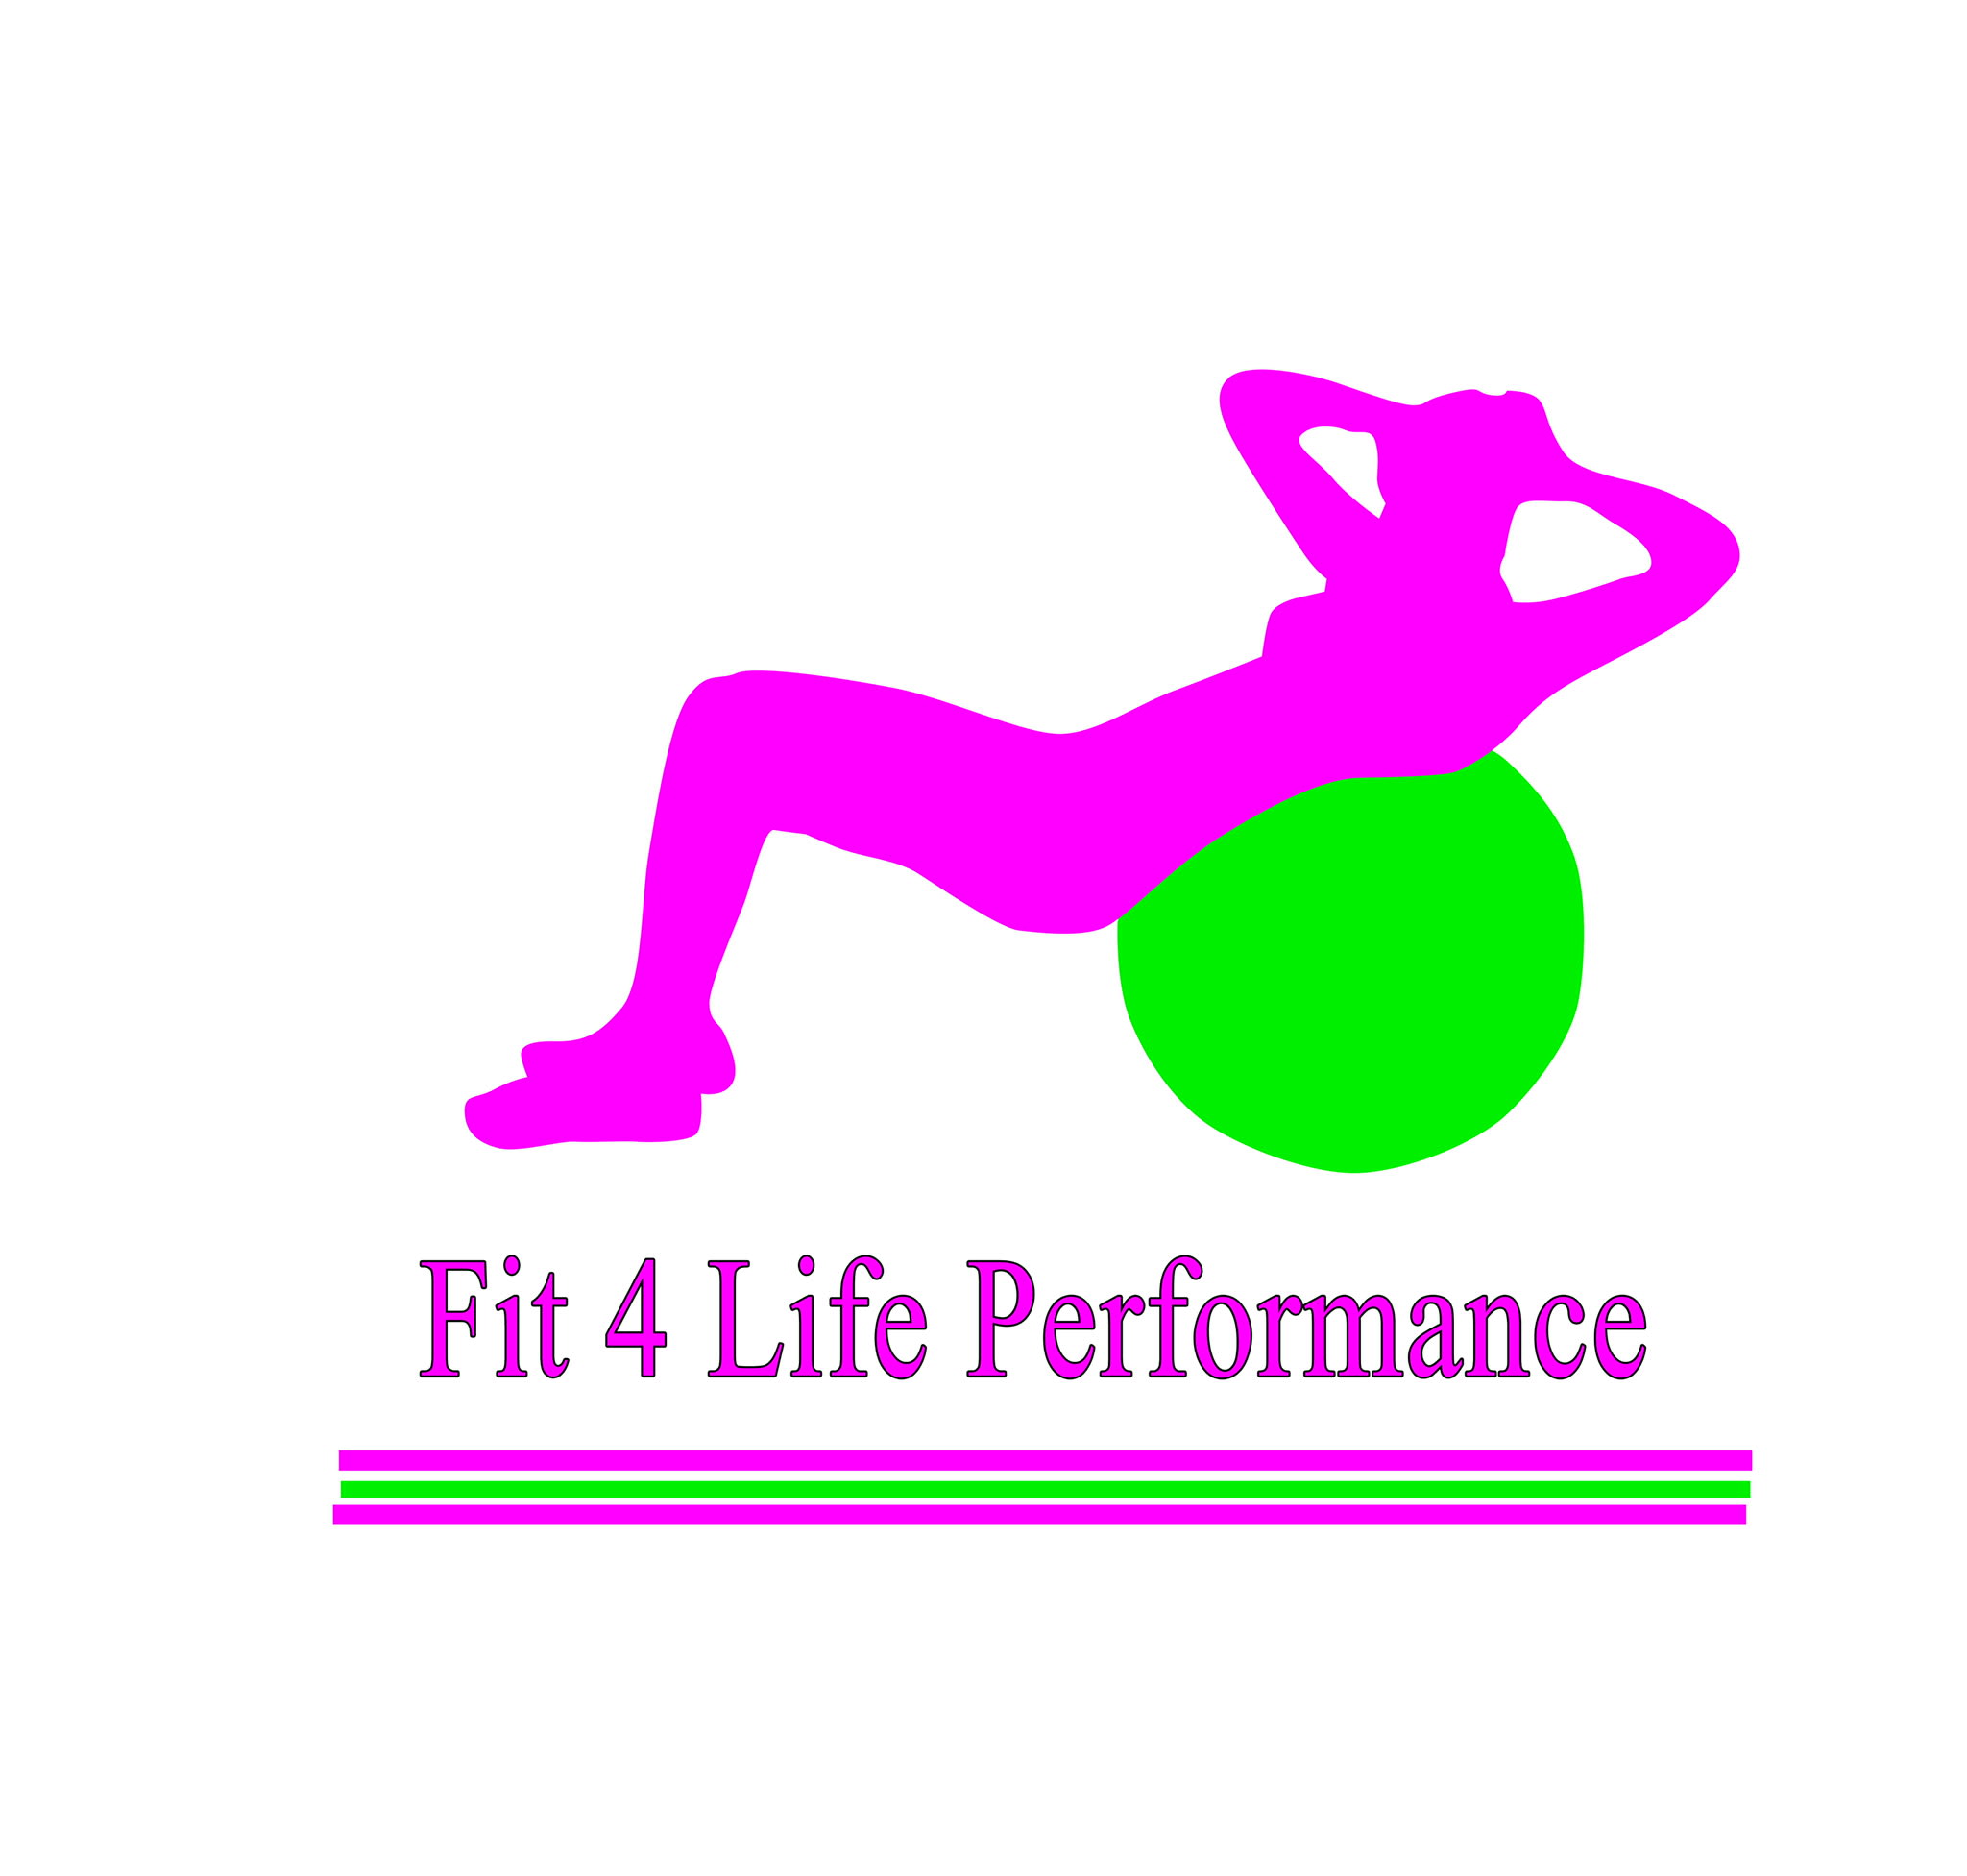 Fit 4 Life Performance